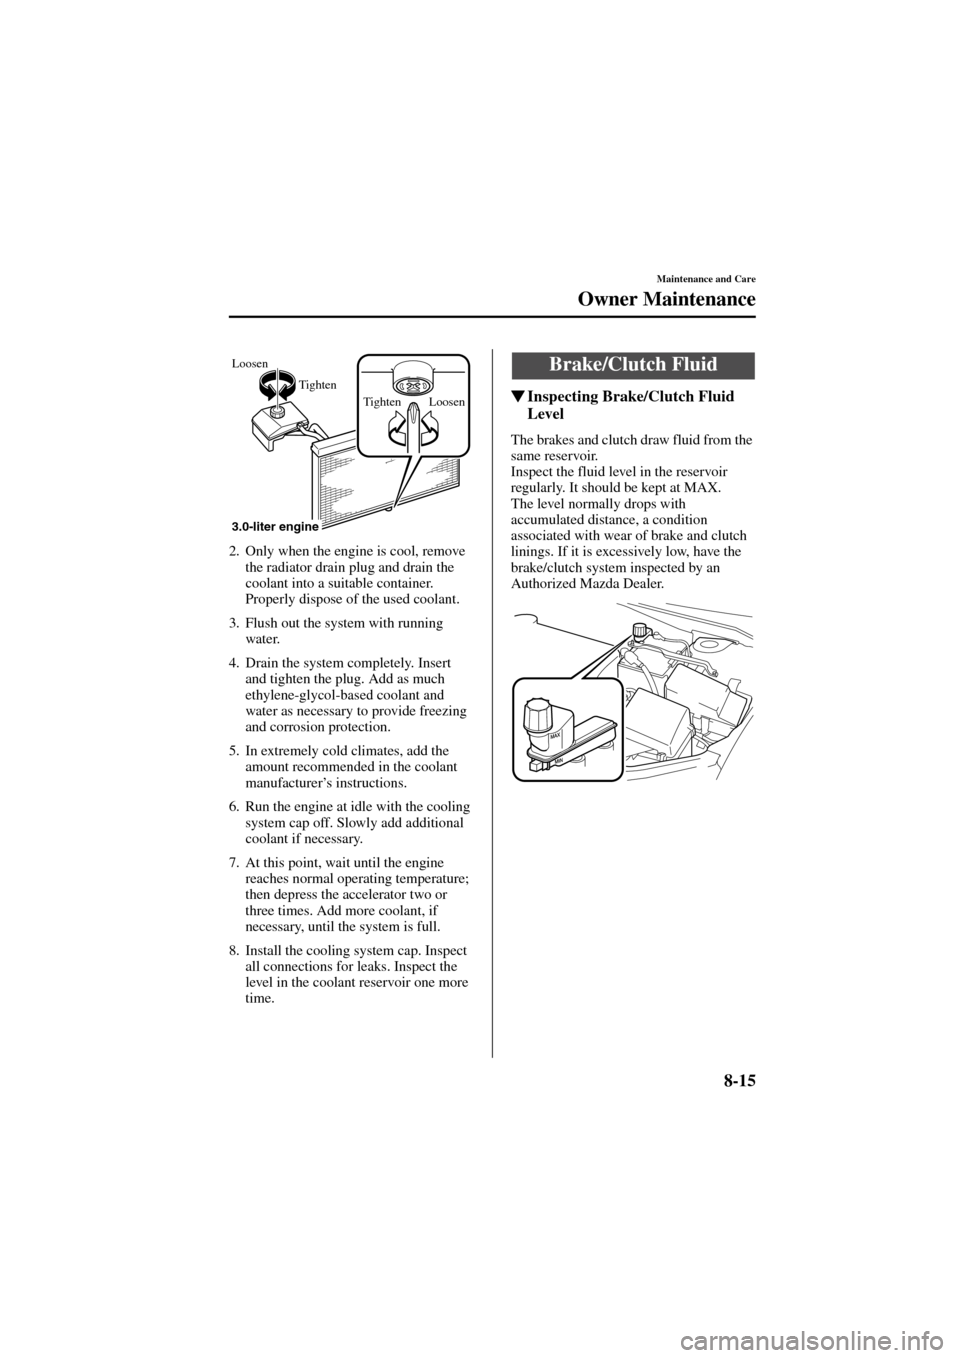 MAZDA MODEL 6 2004   (in English) User Guide 8-15
Maintenance and Care
Owner Maintenance
Form No. 8R29-EA-02I
2. Only when the engine is cool, remove 
the radiator drain plug and drain the 
coolant into a suitable container. 
Properly dispose of